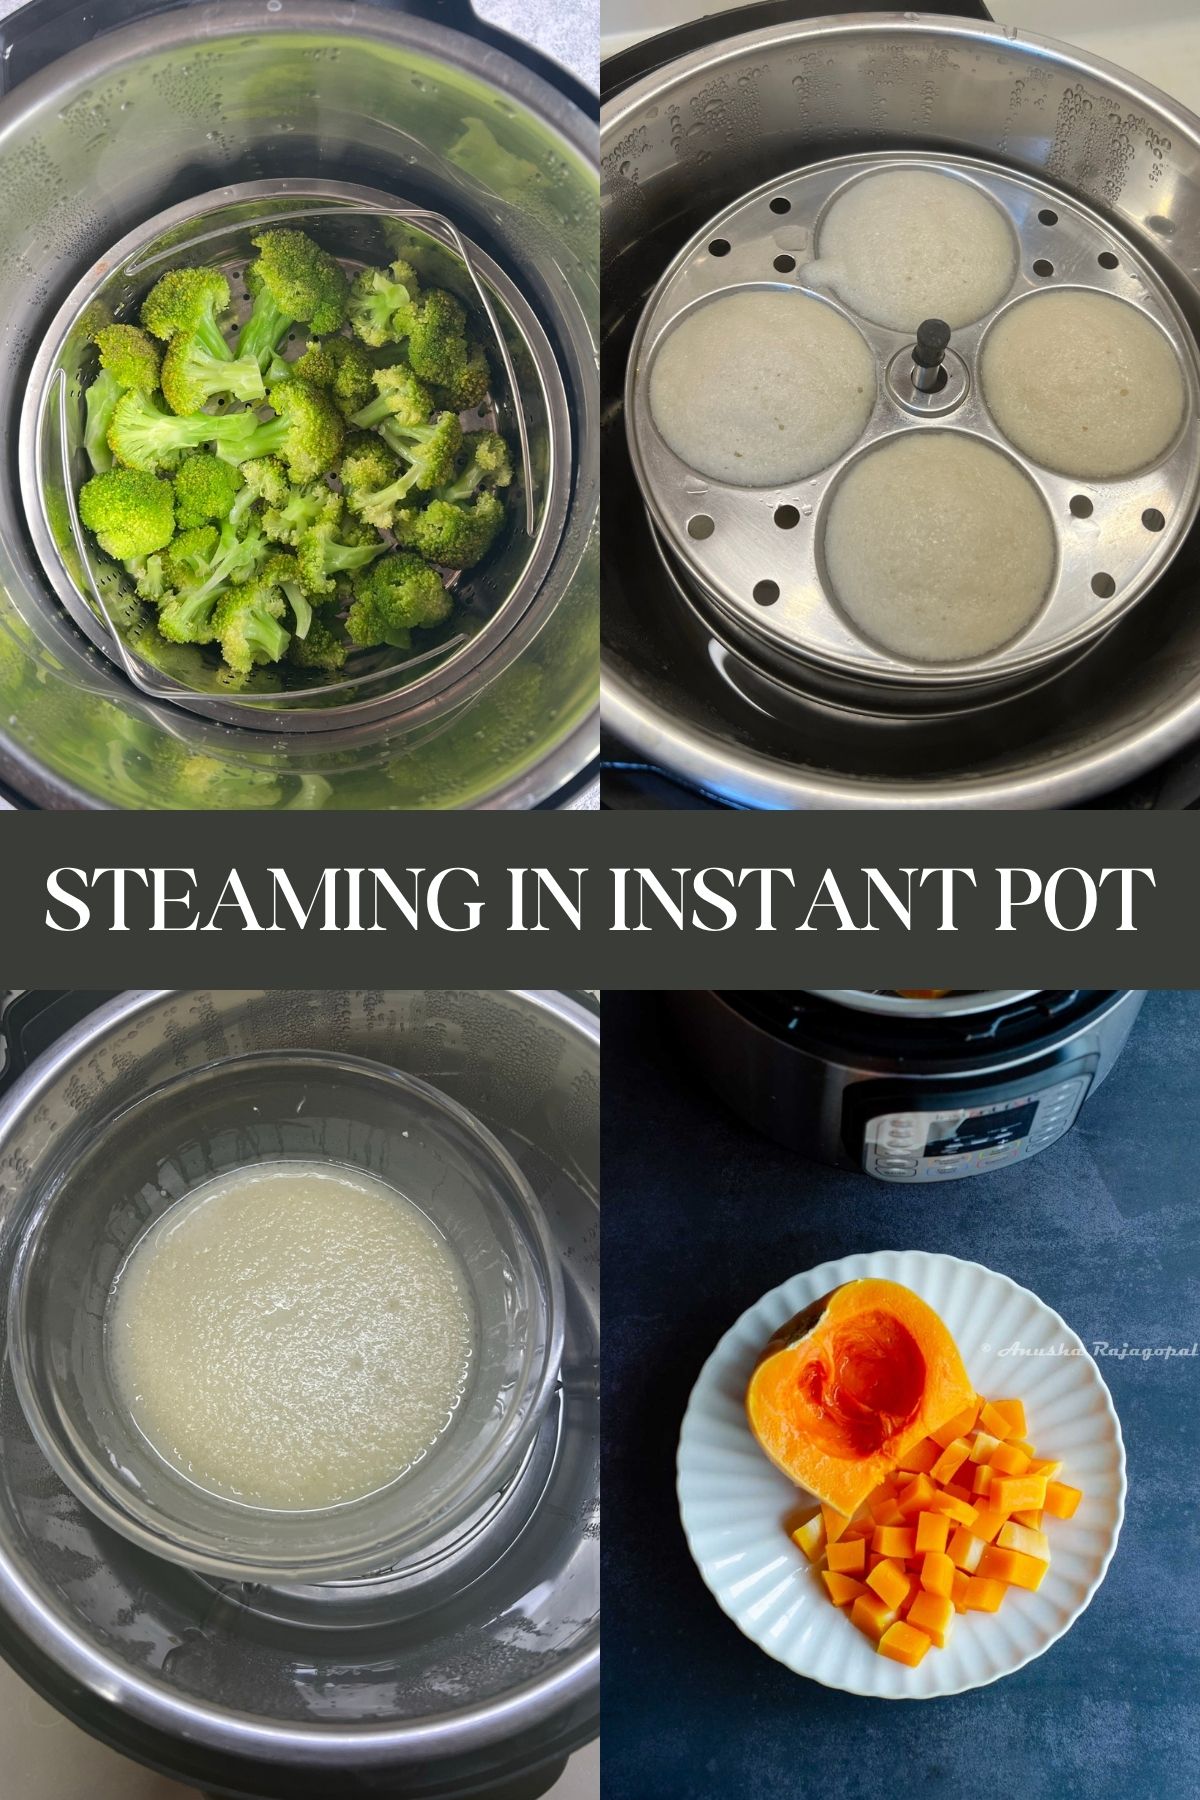 How to steam in the Instant Pot? - Tomato Blues